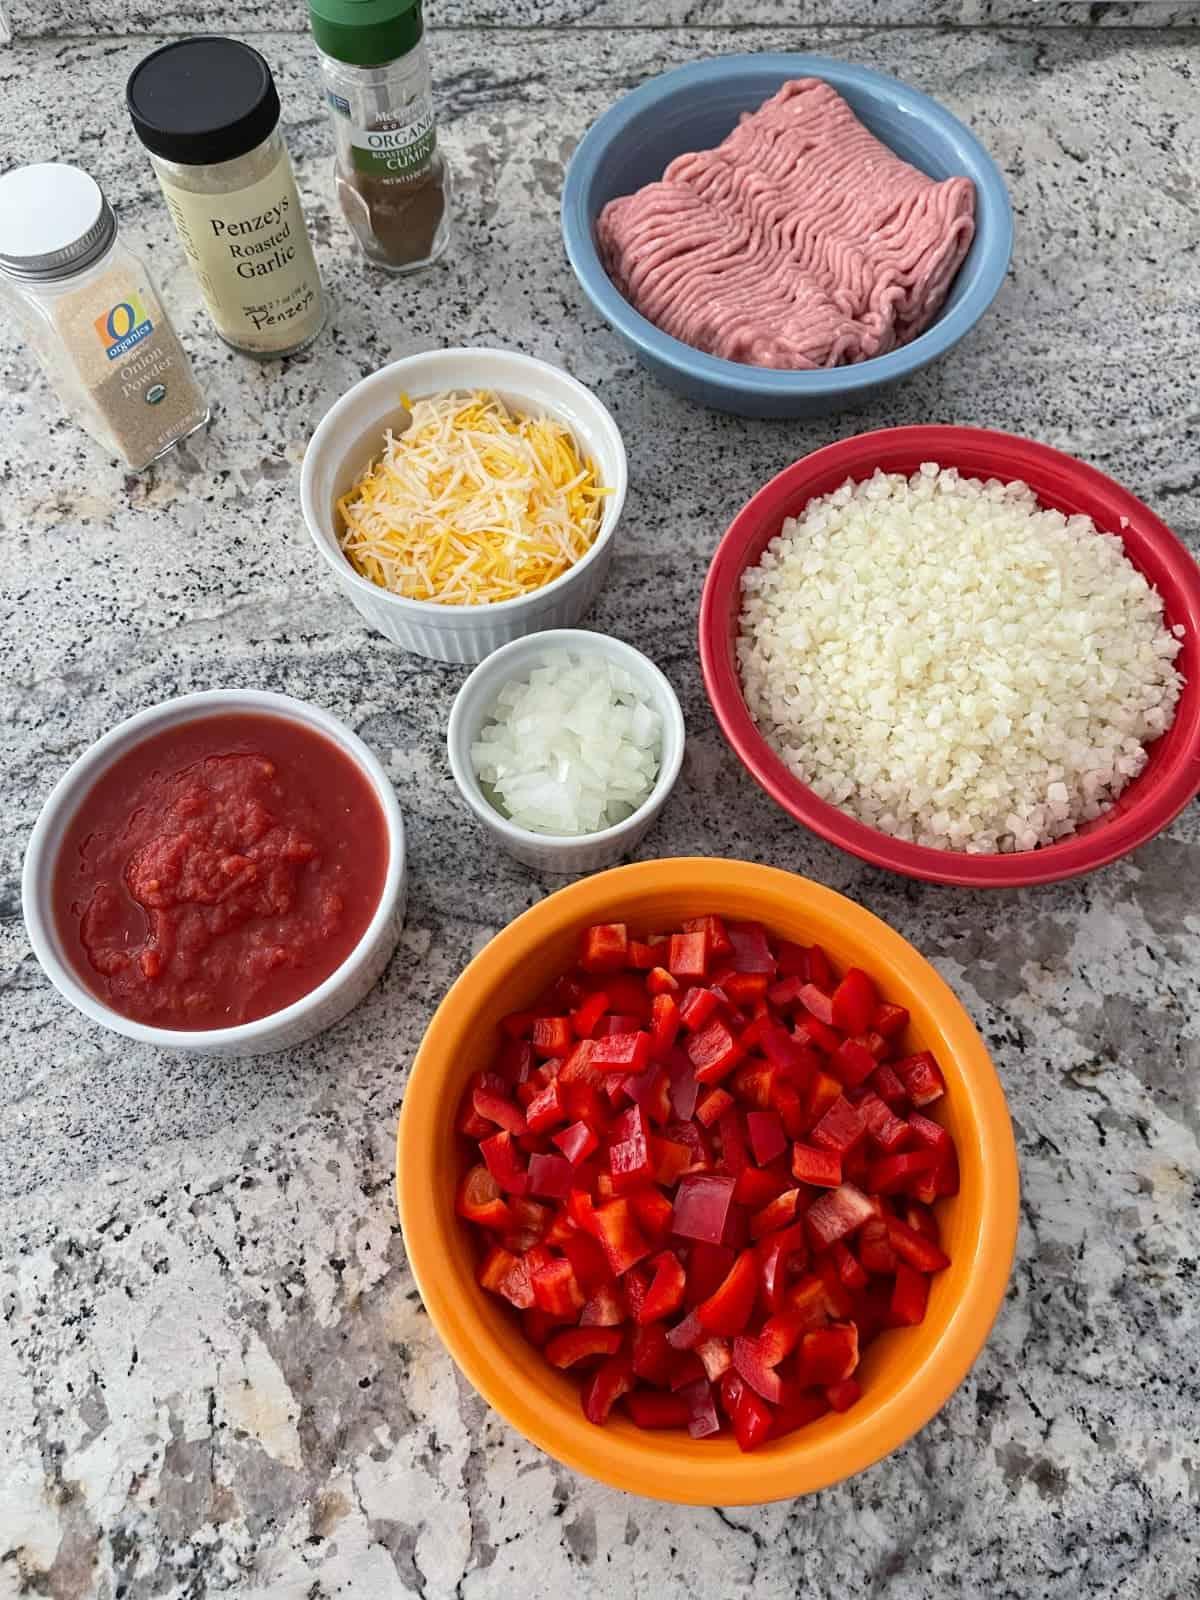 Ingredients including chopped red bell peppers, riced cauliflower, ground turkey, crushed tomatoes, chopped onion, shredded cheese and spices on granite.